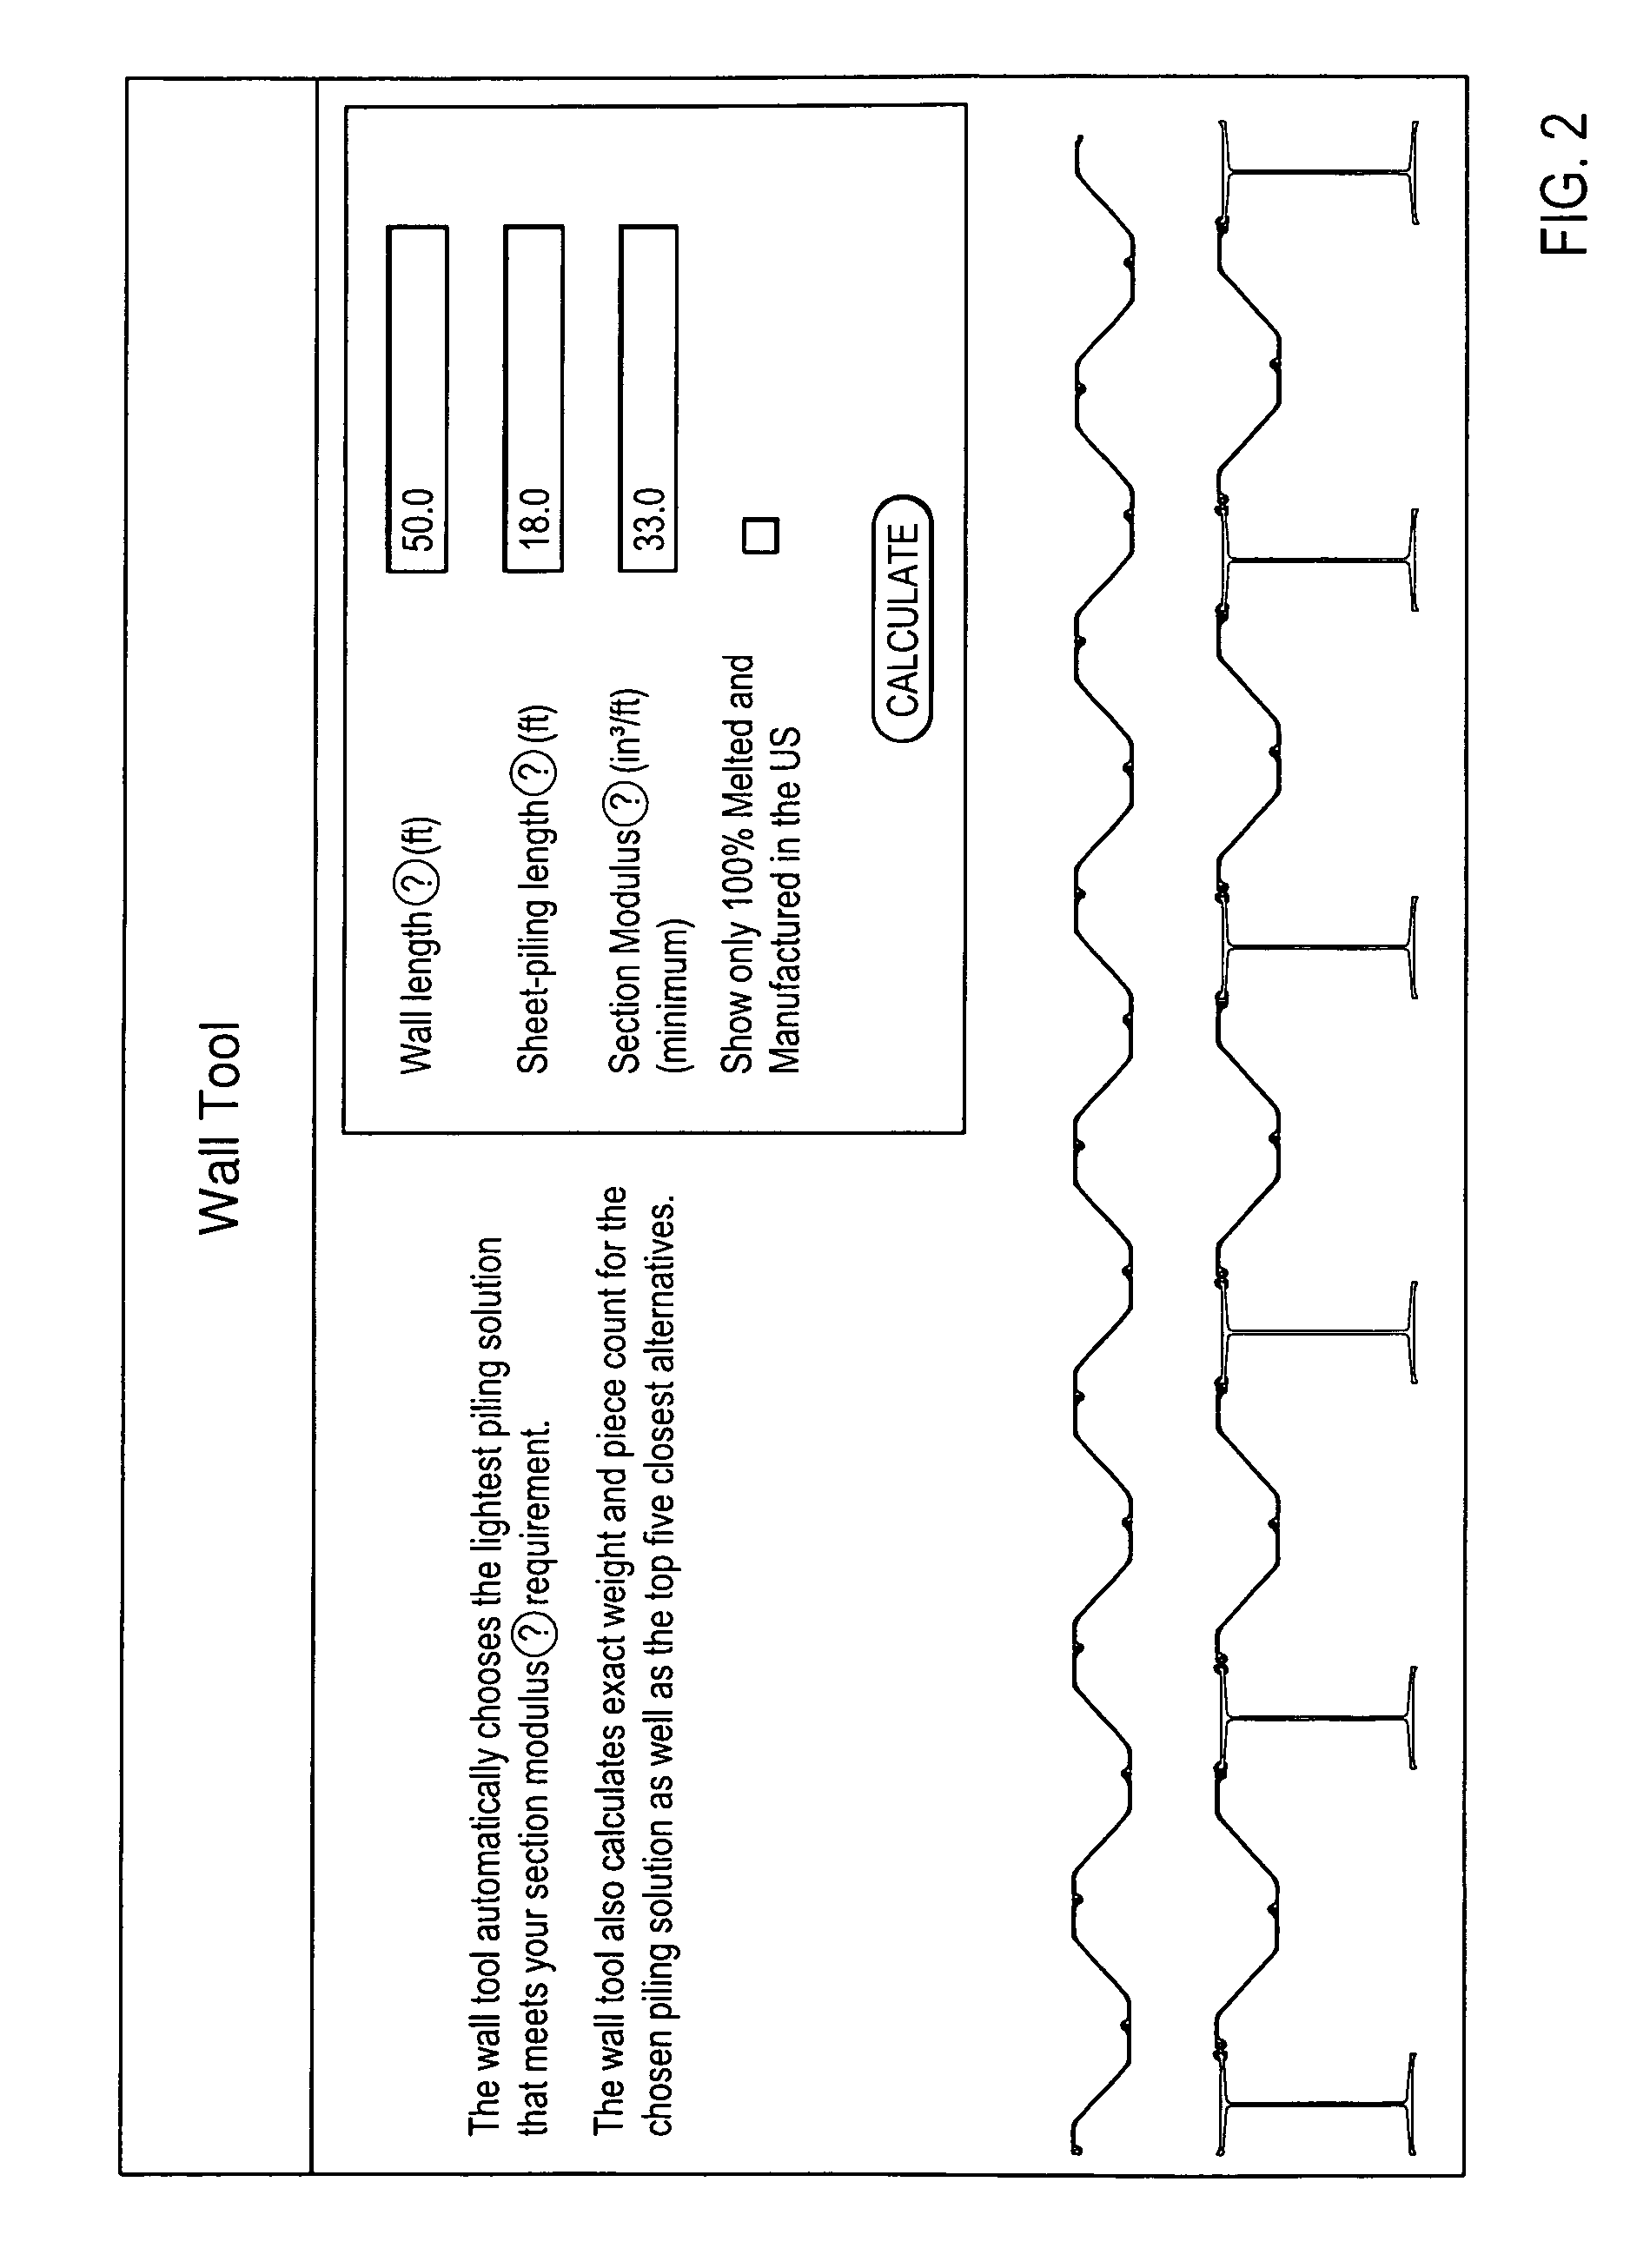 Method for planning sheet pile wall sections